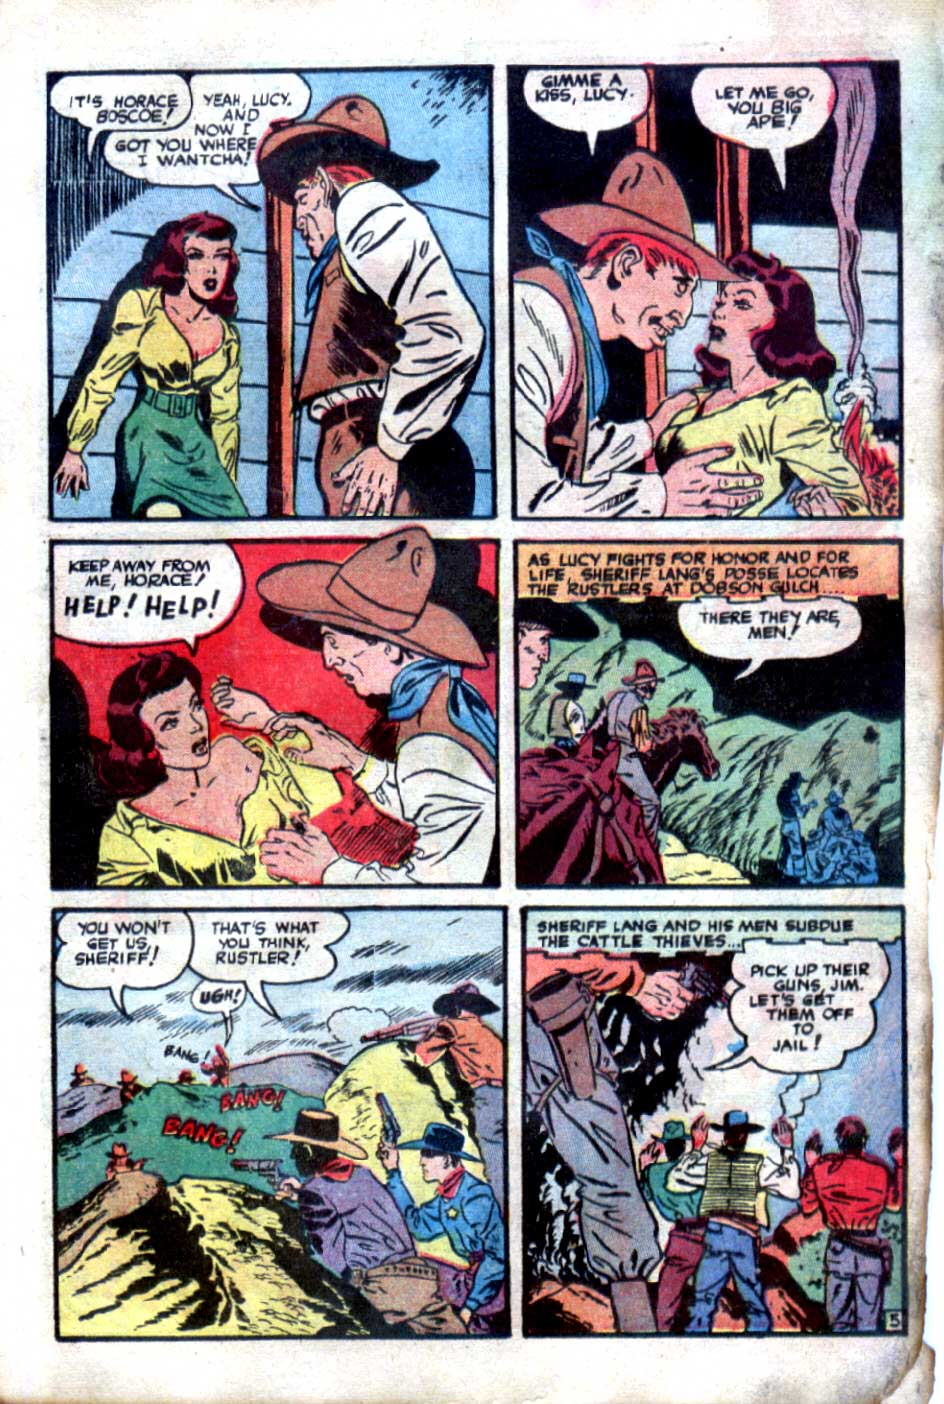 Western Crime Busters v1 #10 - Wally Wood art 1950s western comic book page